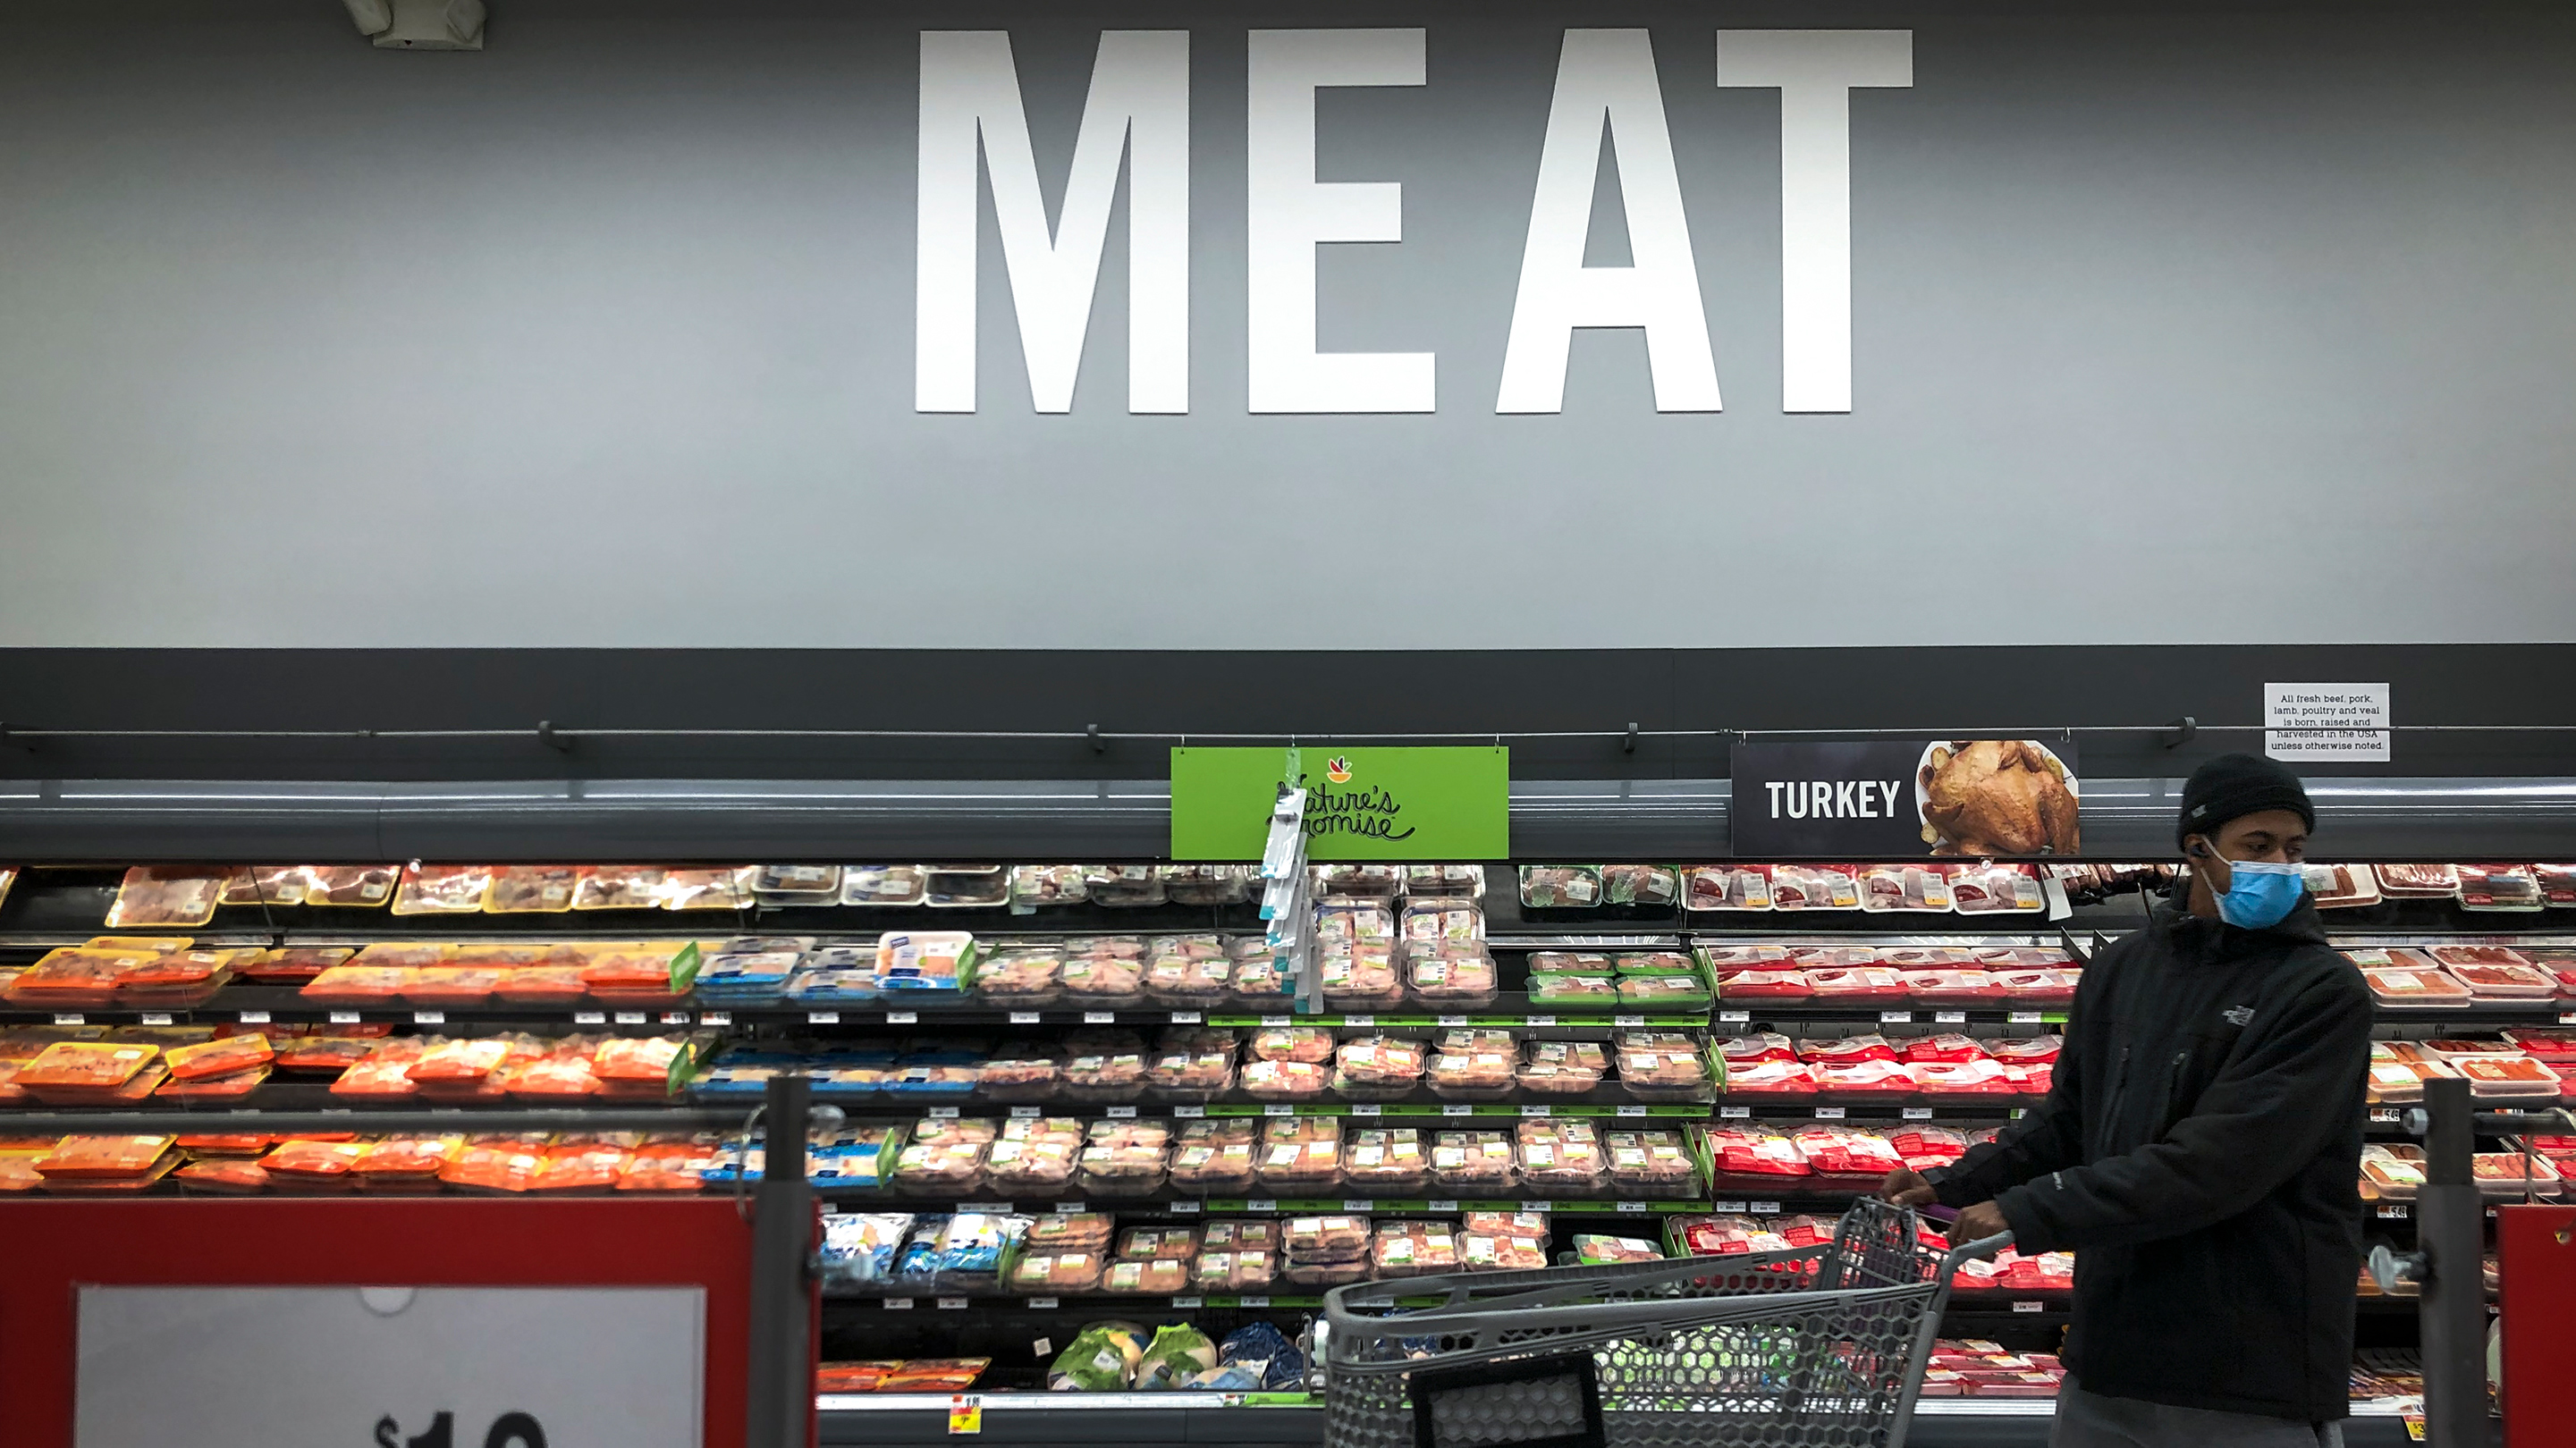 Meat prices are down, with surpluses lingering - Marketplace